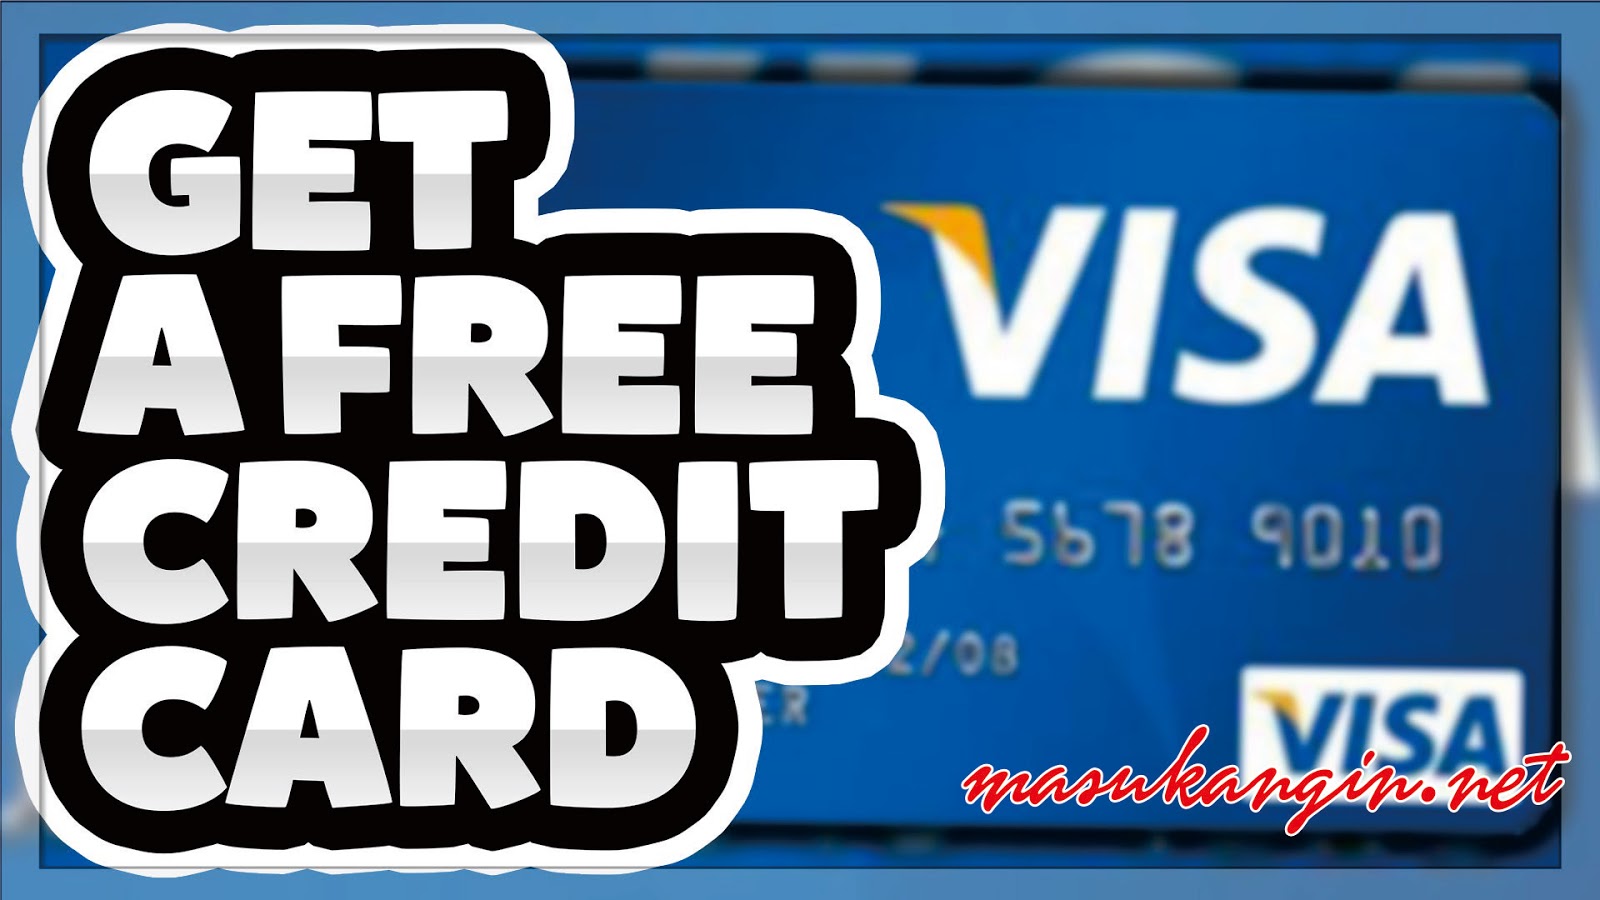 How to Get Free Visa Credit Card Numbers That Work 2018 - Mbreww Bloger's